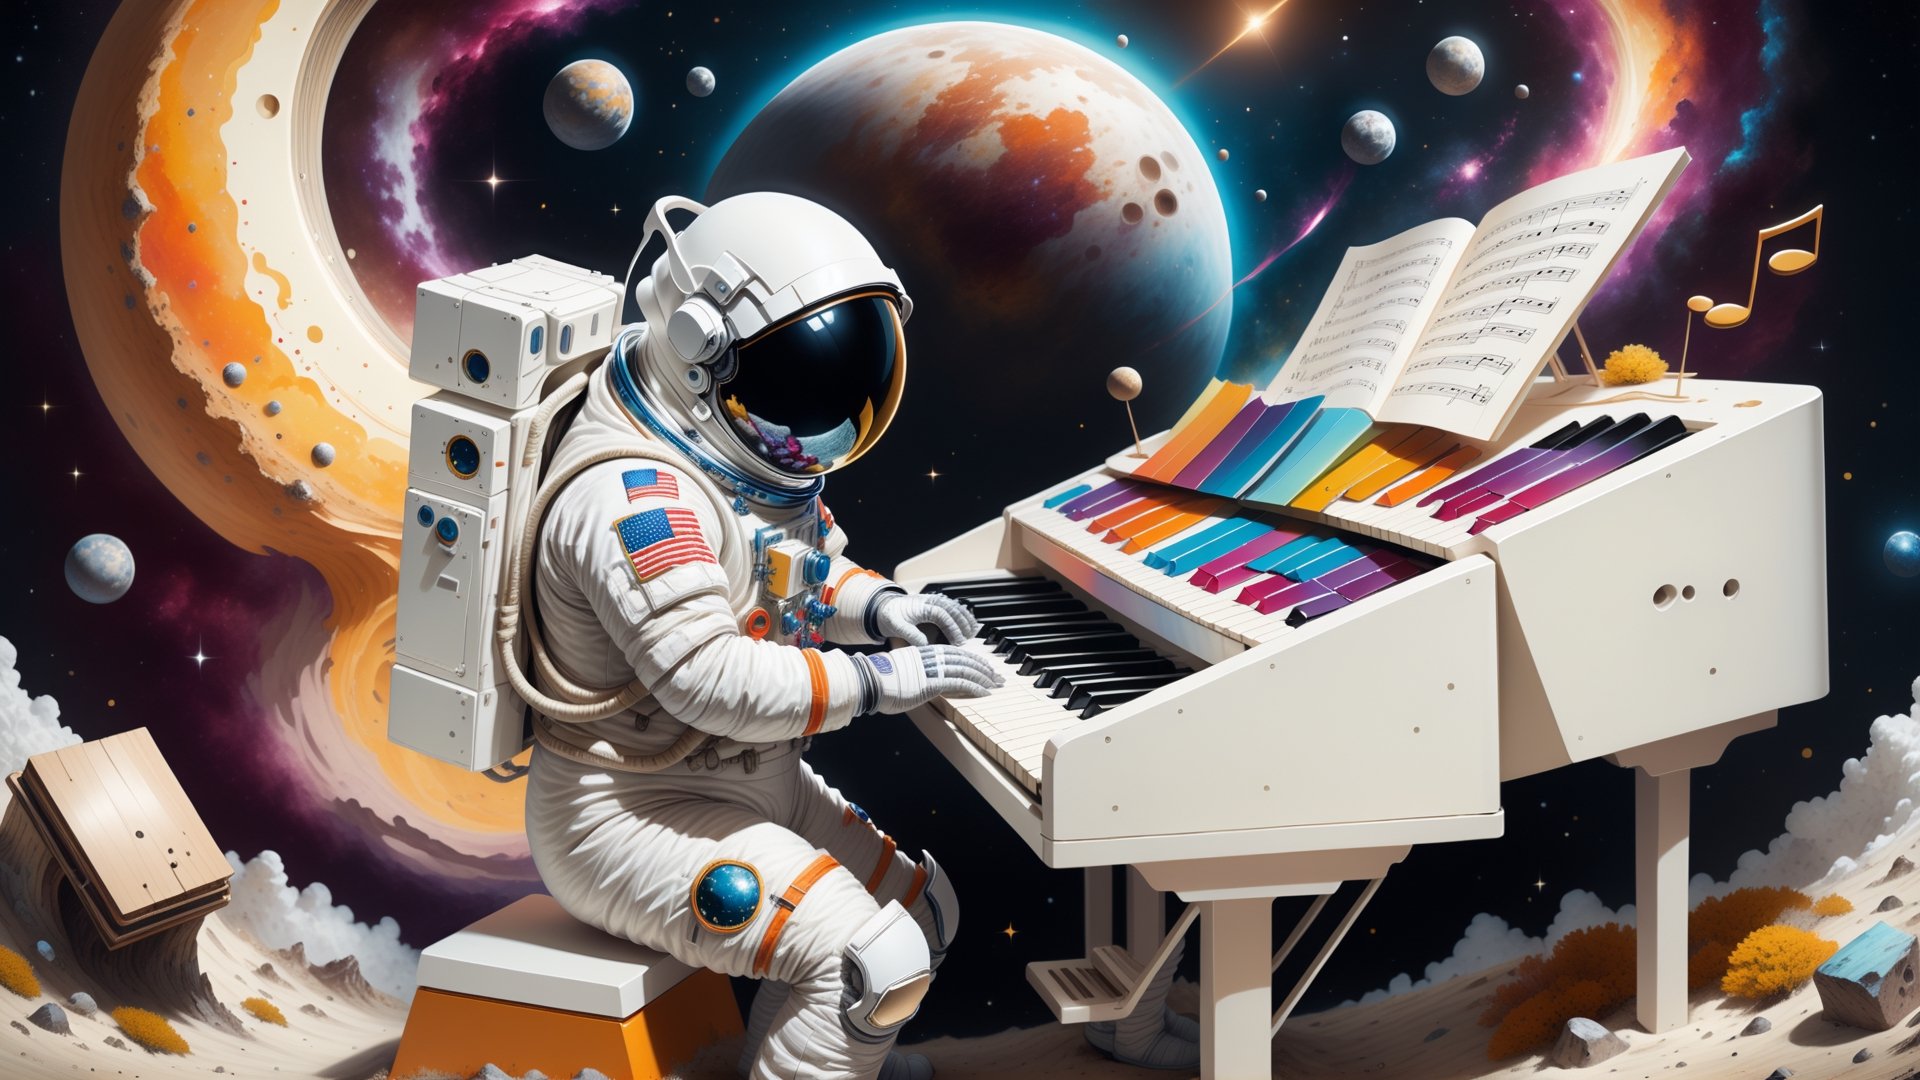 Generate an image of a astronaut standing(PLAYING music keyboard), in a surreal universe where dreams materialize as physical objects. Show the character discovering a dream object that holds profound significance to them. This object should be beautifully detailed and symbolic, representing their deepest desires or emotions. Capture the character's emotional reaction as they encounter this extraordinary manifestation, conveying a mix of wonder, nostalgia, and perhaps even a touch of melancholy, creating a visually compelling and emotionally charged scene."